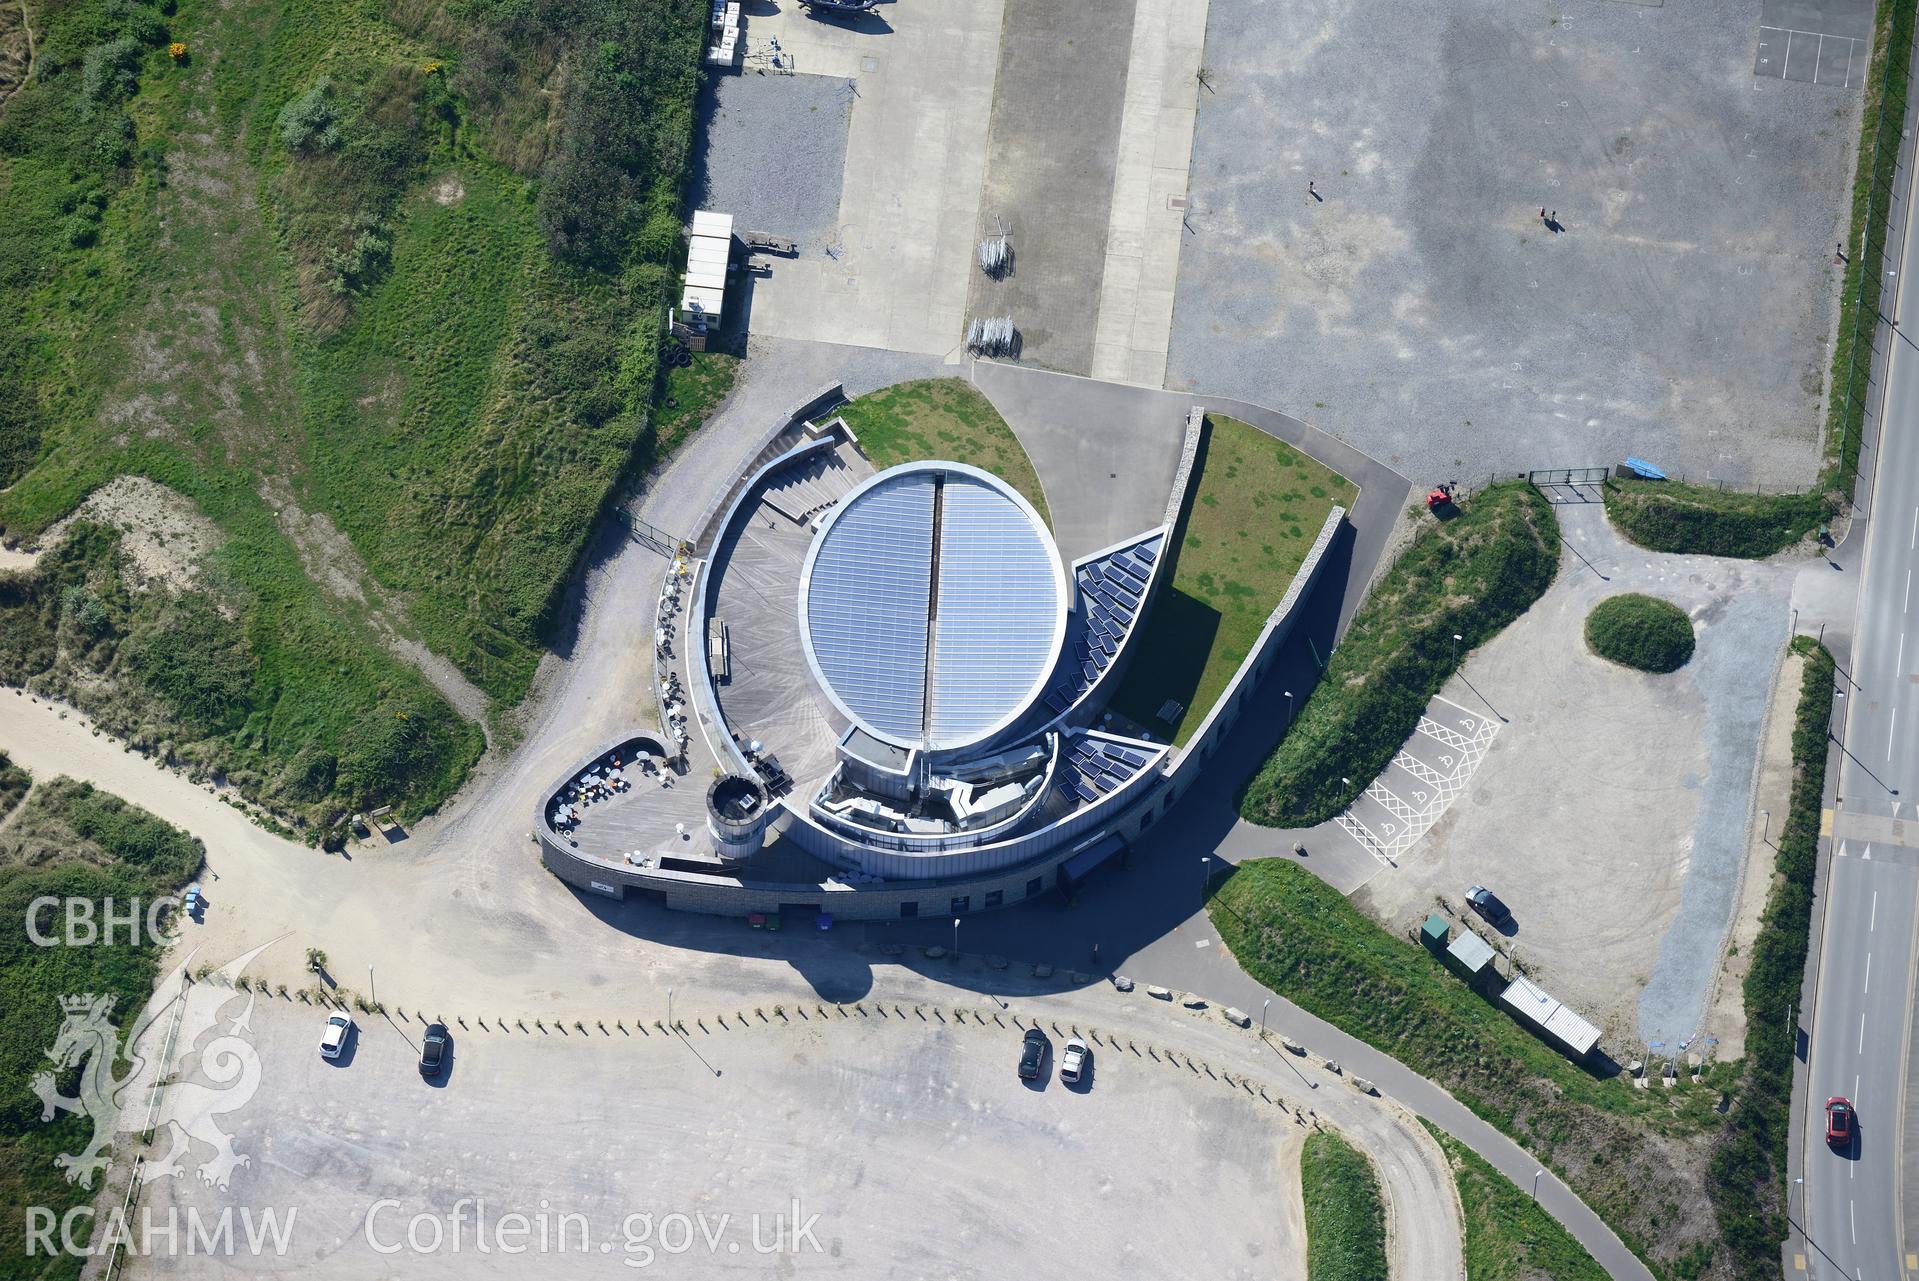 Aerial photography of Pwllheli Harbour taken on 3rd May 2017.  Baseline aerial reconnaissance survey for the CHERISH Project. ? Crown: CHERISH PROJECT 2017. Produced with EU funds through the Ireland Wales Co-operation Programme 2014-2020. All material made freely available through the Open Government Licence.